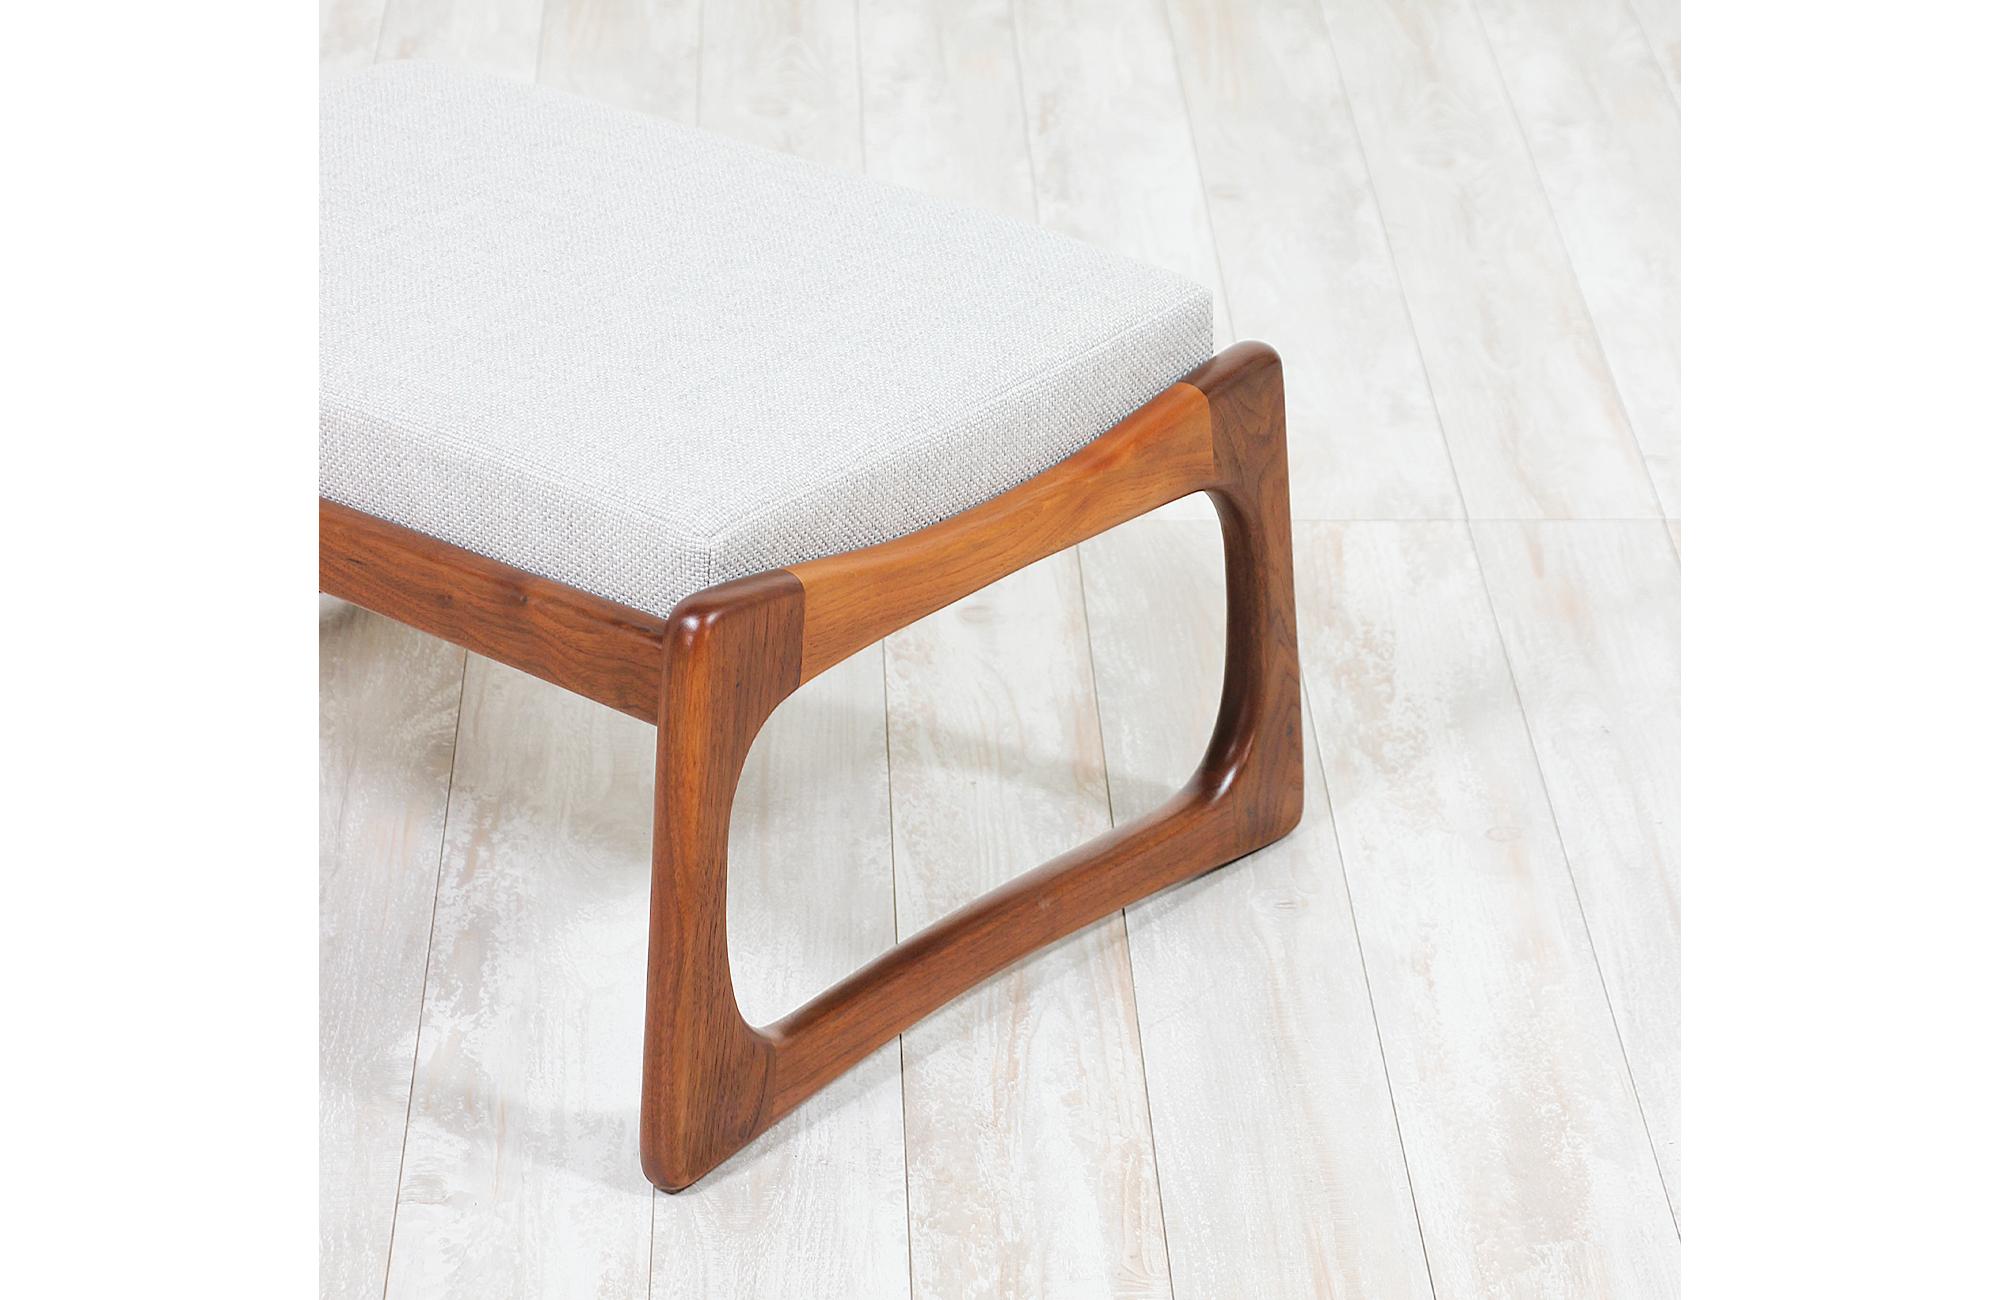 Wood Adrian Pearsall Sculptural Stool for Craft Associates